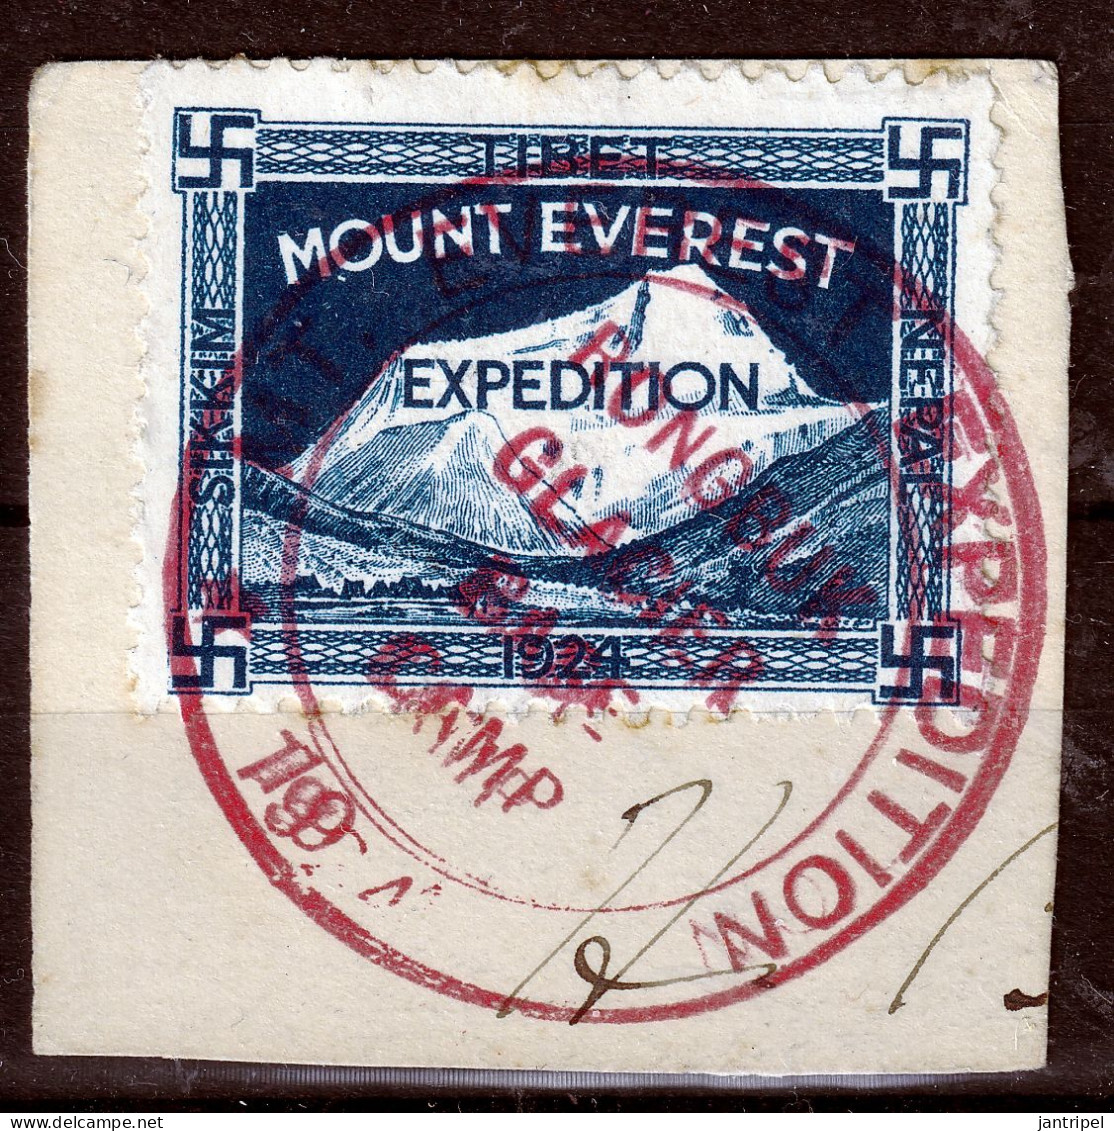 TIBET 1924 MOUNT EVEREST EXPEDITION RONGBUK GLACIER BASE CAMP CANCELLATION On COVER FRAGMENT - Asia (Other)